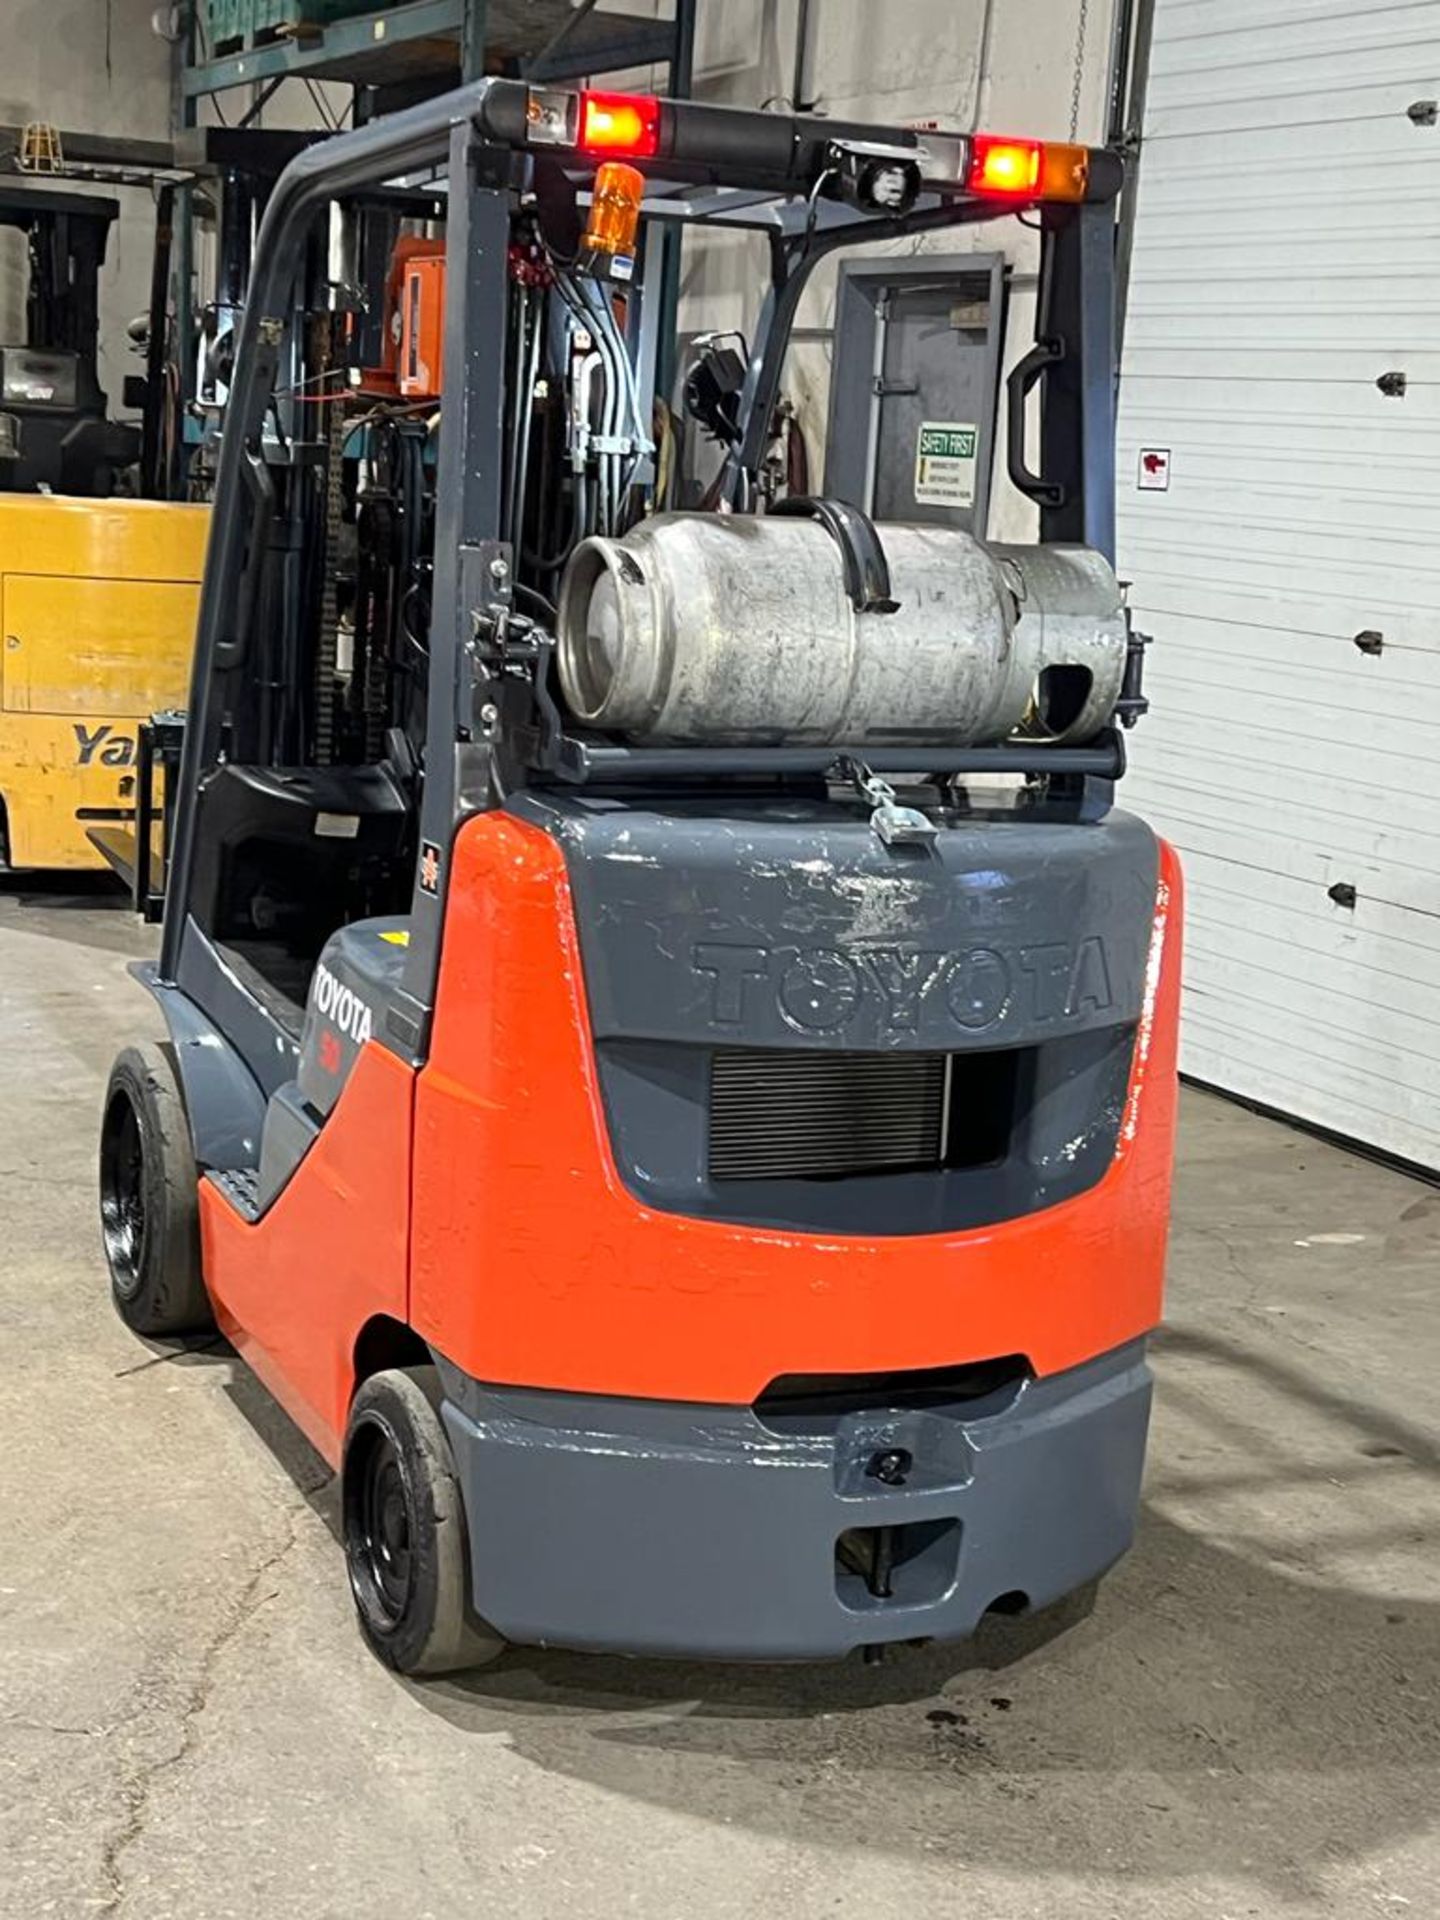 2015 Toyota 5,000lbs Capacity LPG (Propane) Forklift with sideshift and 3-STAGE MAST - Image 3 of 3